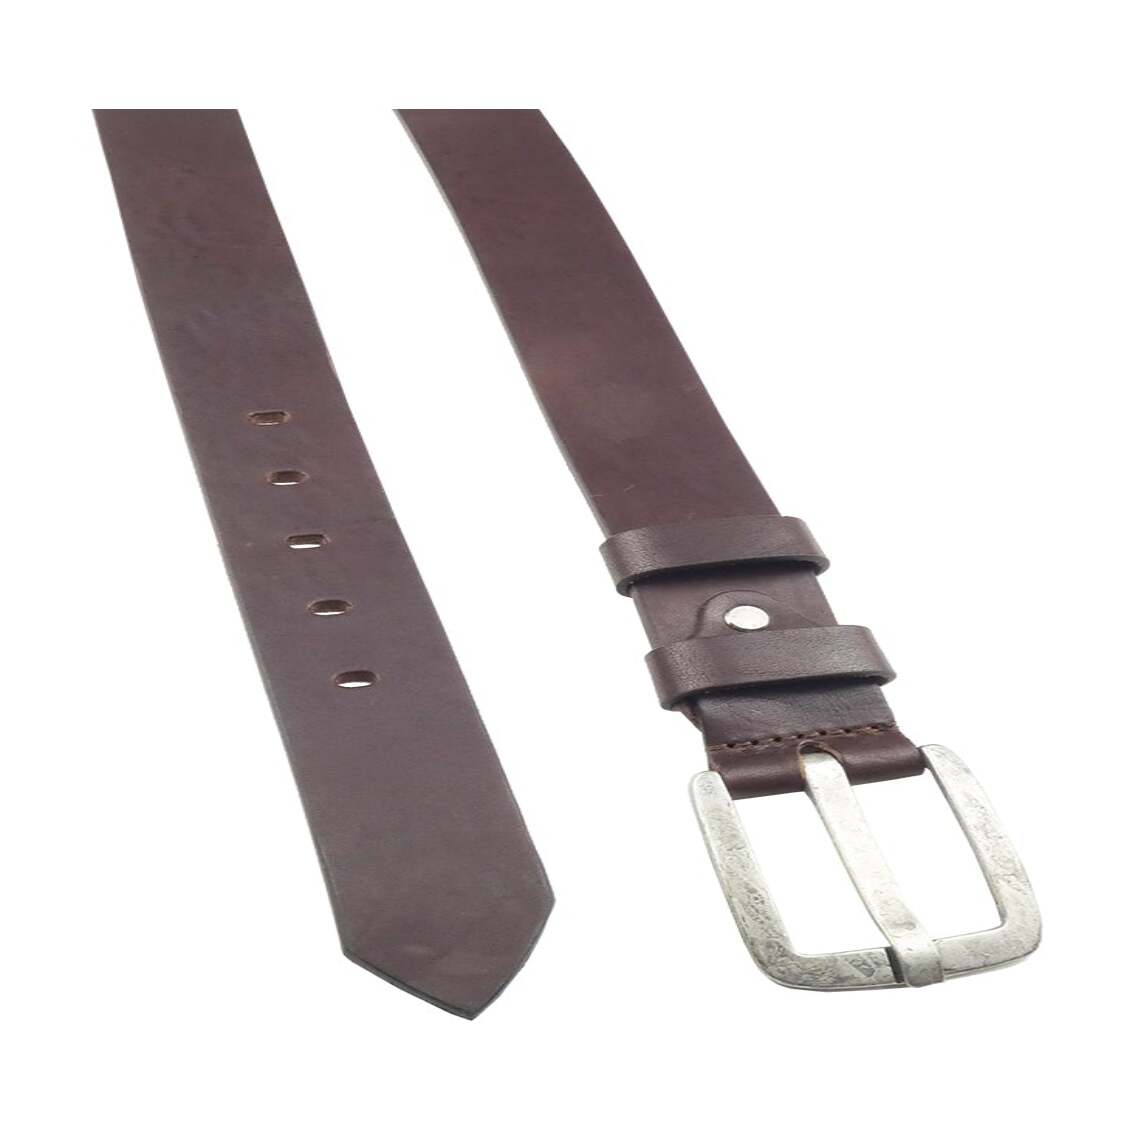 4cm Milano leather belt with handcrafted antique silver zamak buckle